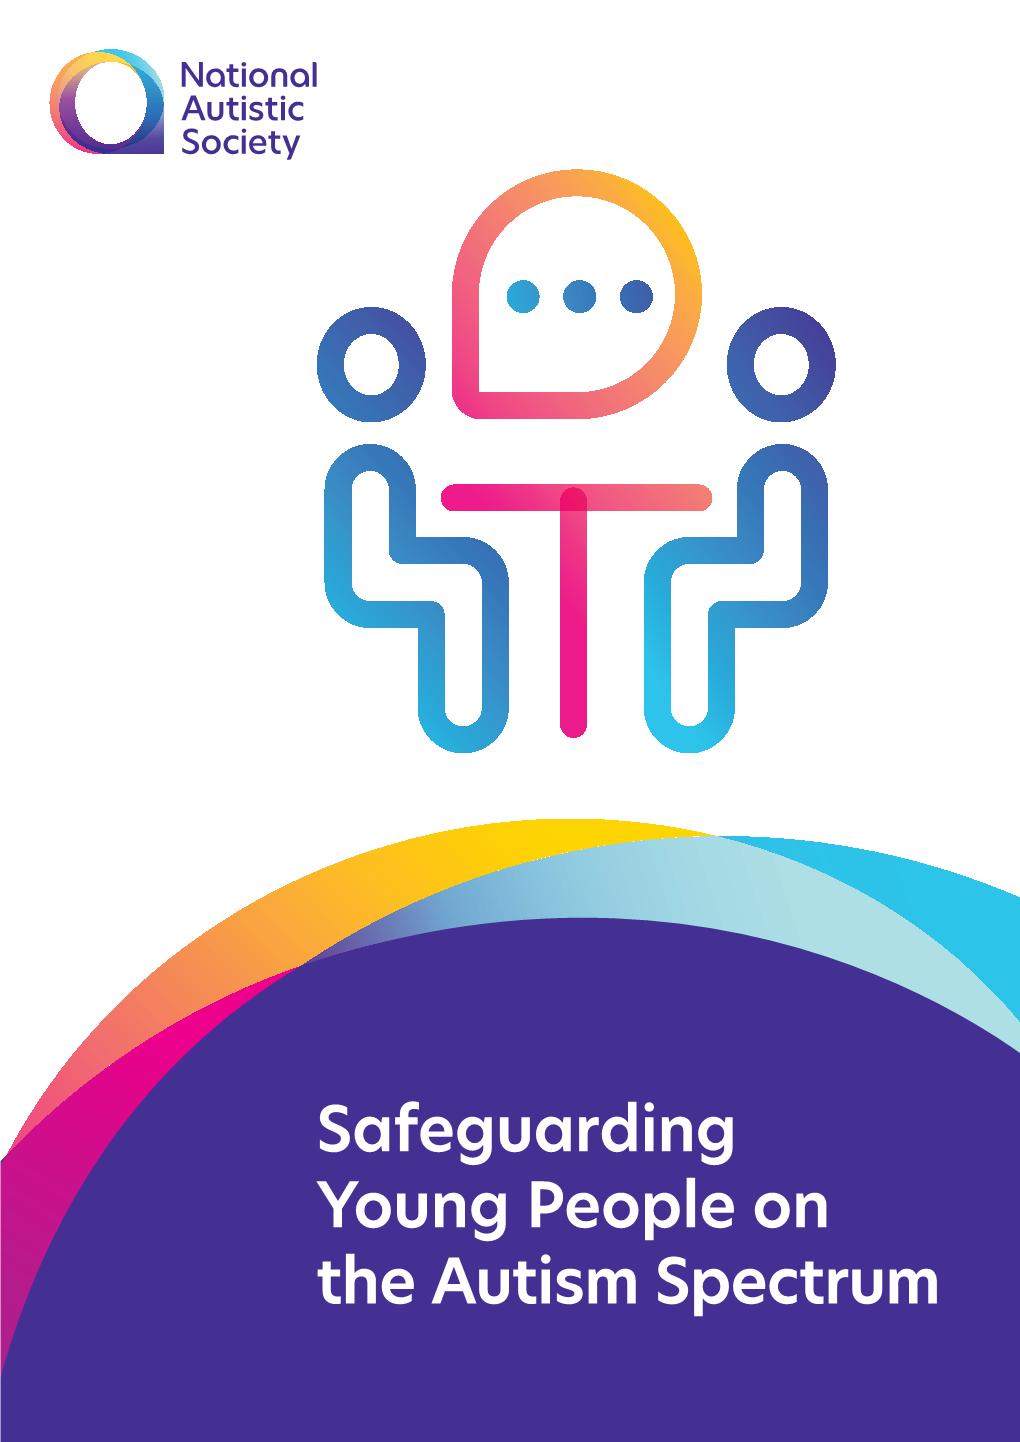 Safeguarding Young People on the Autism Spectrum Booklet